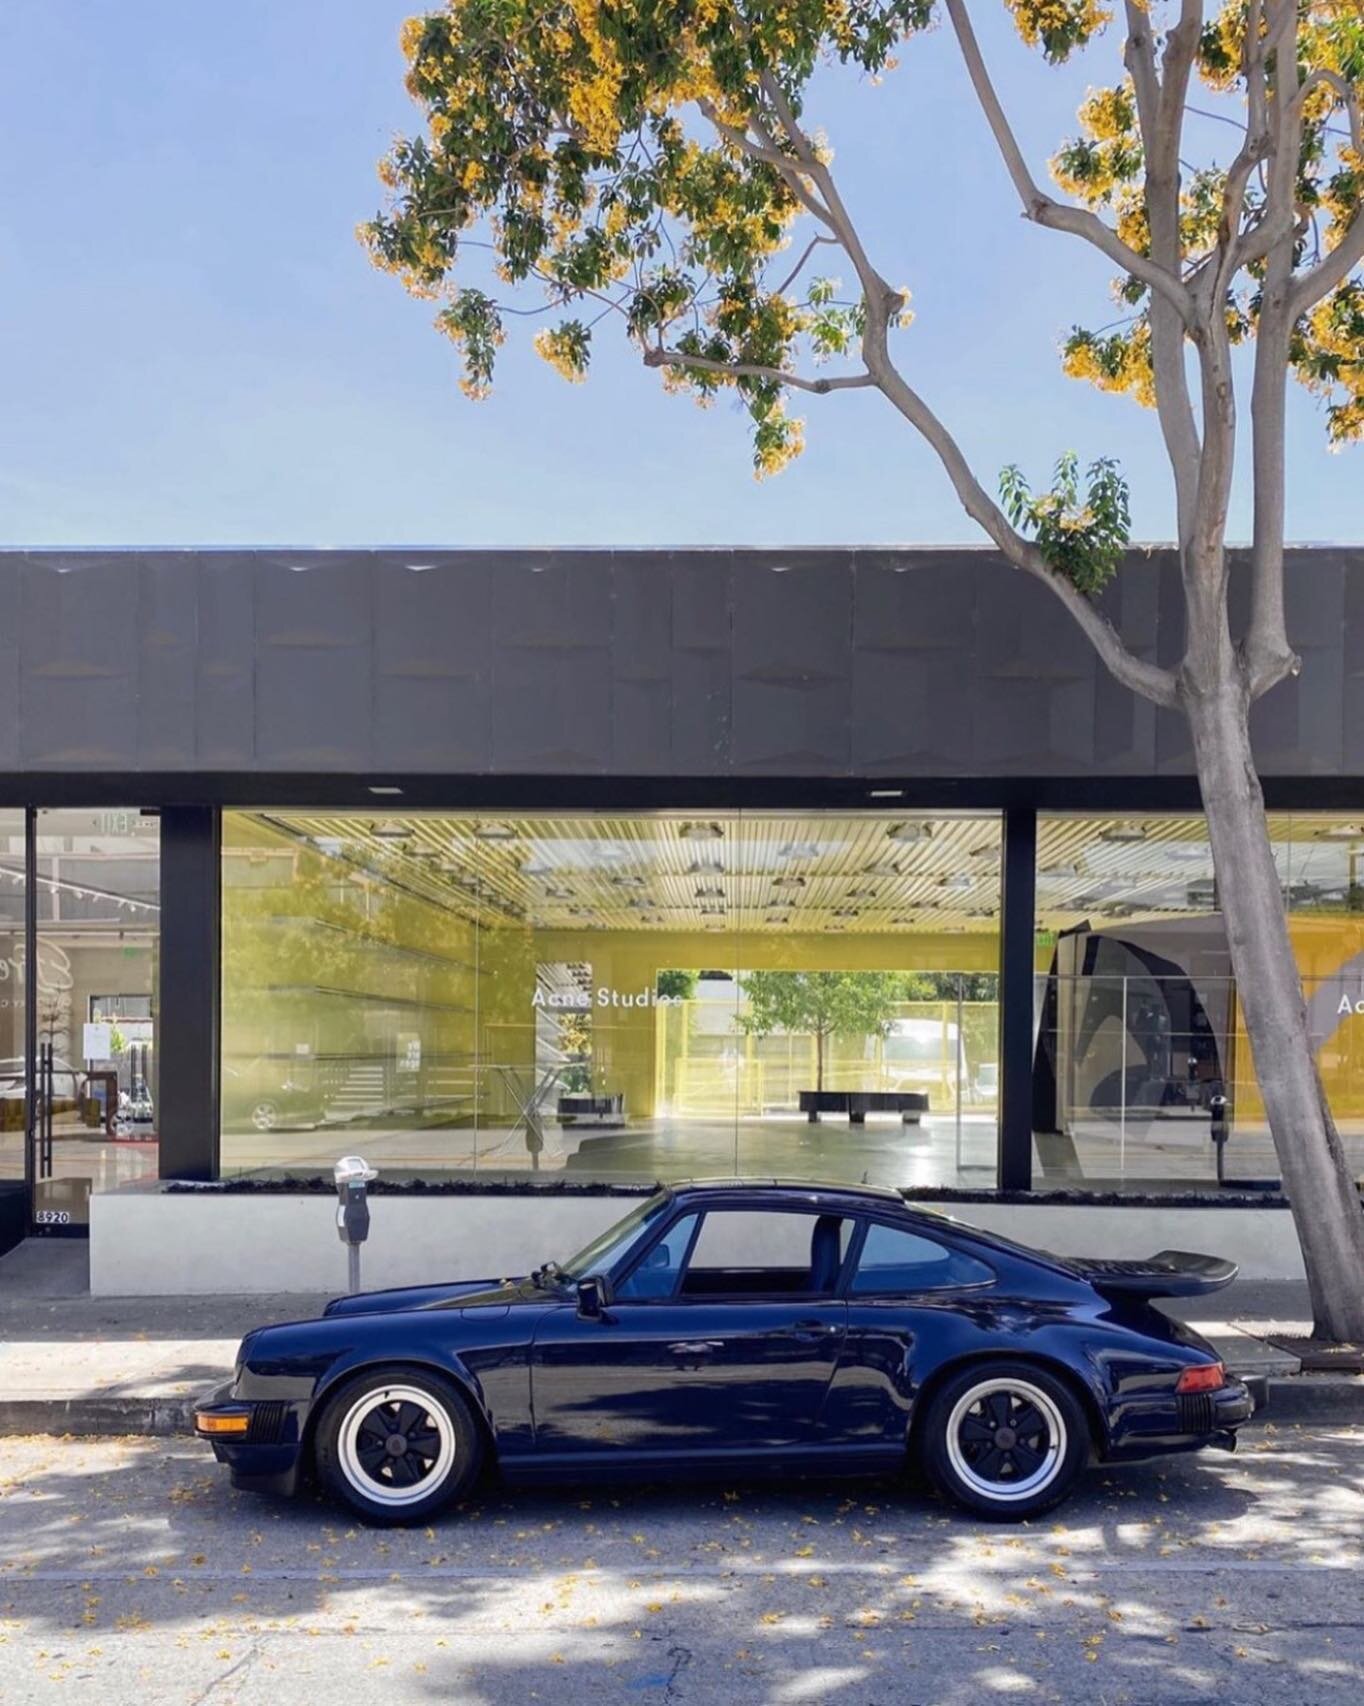 The streets and stores are still quiet in LA - perfect for a weekend cruise. (PC @jlifter)